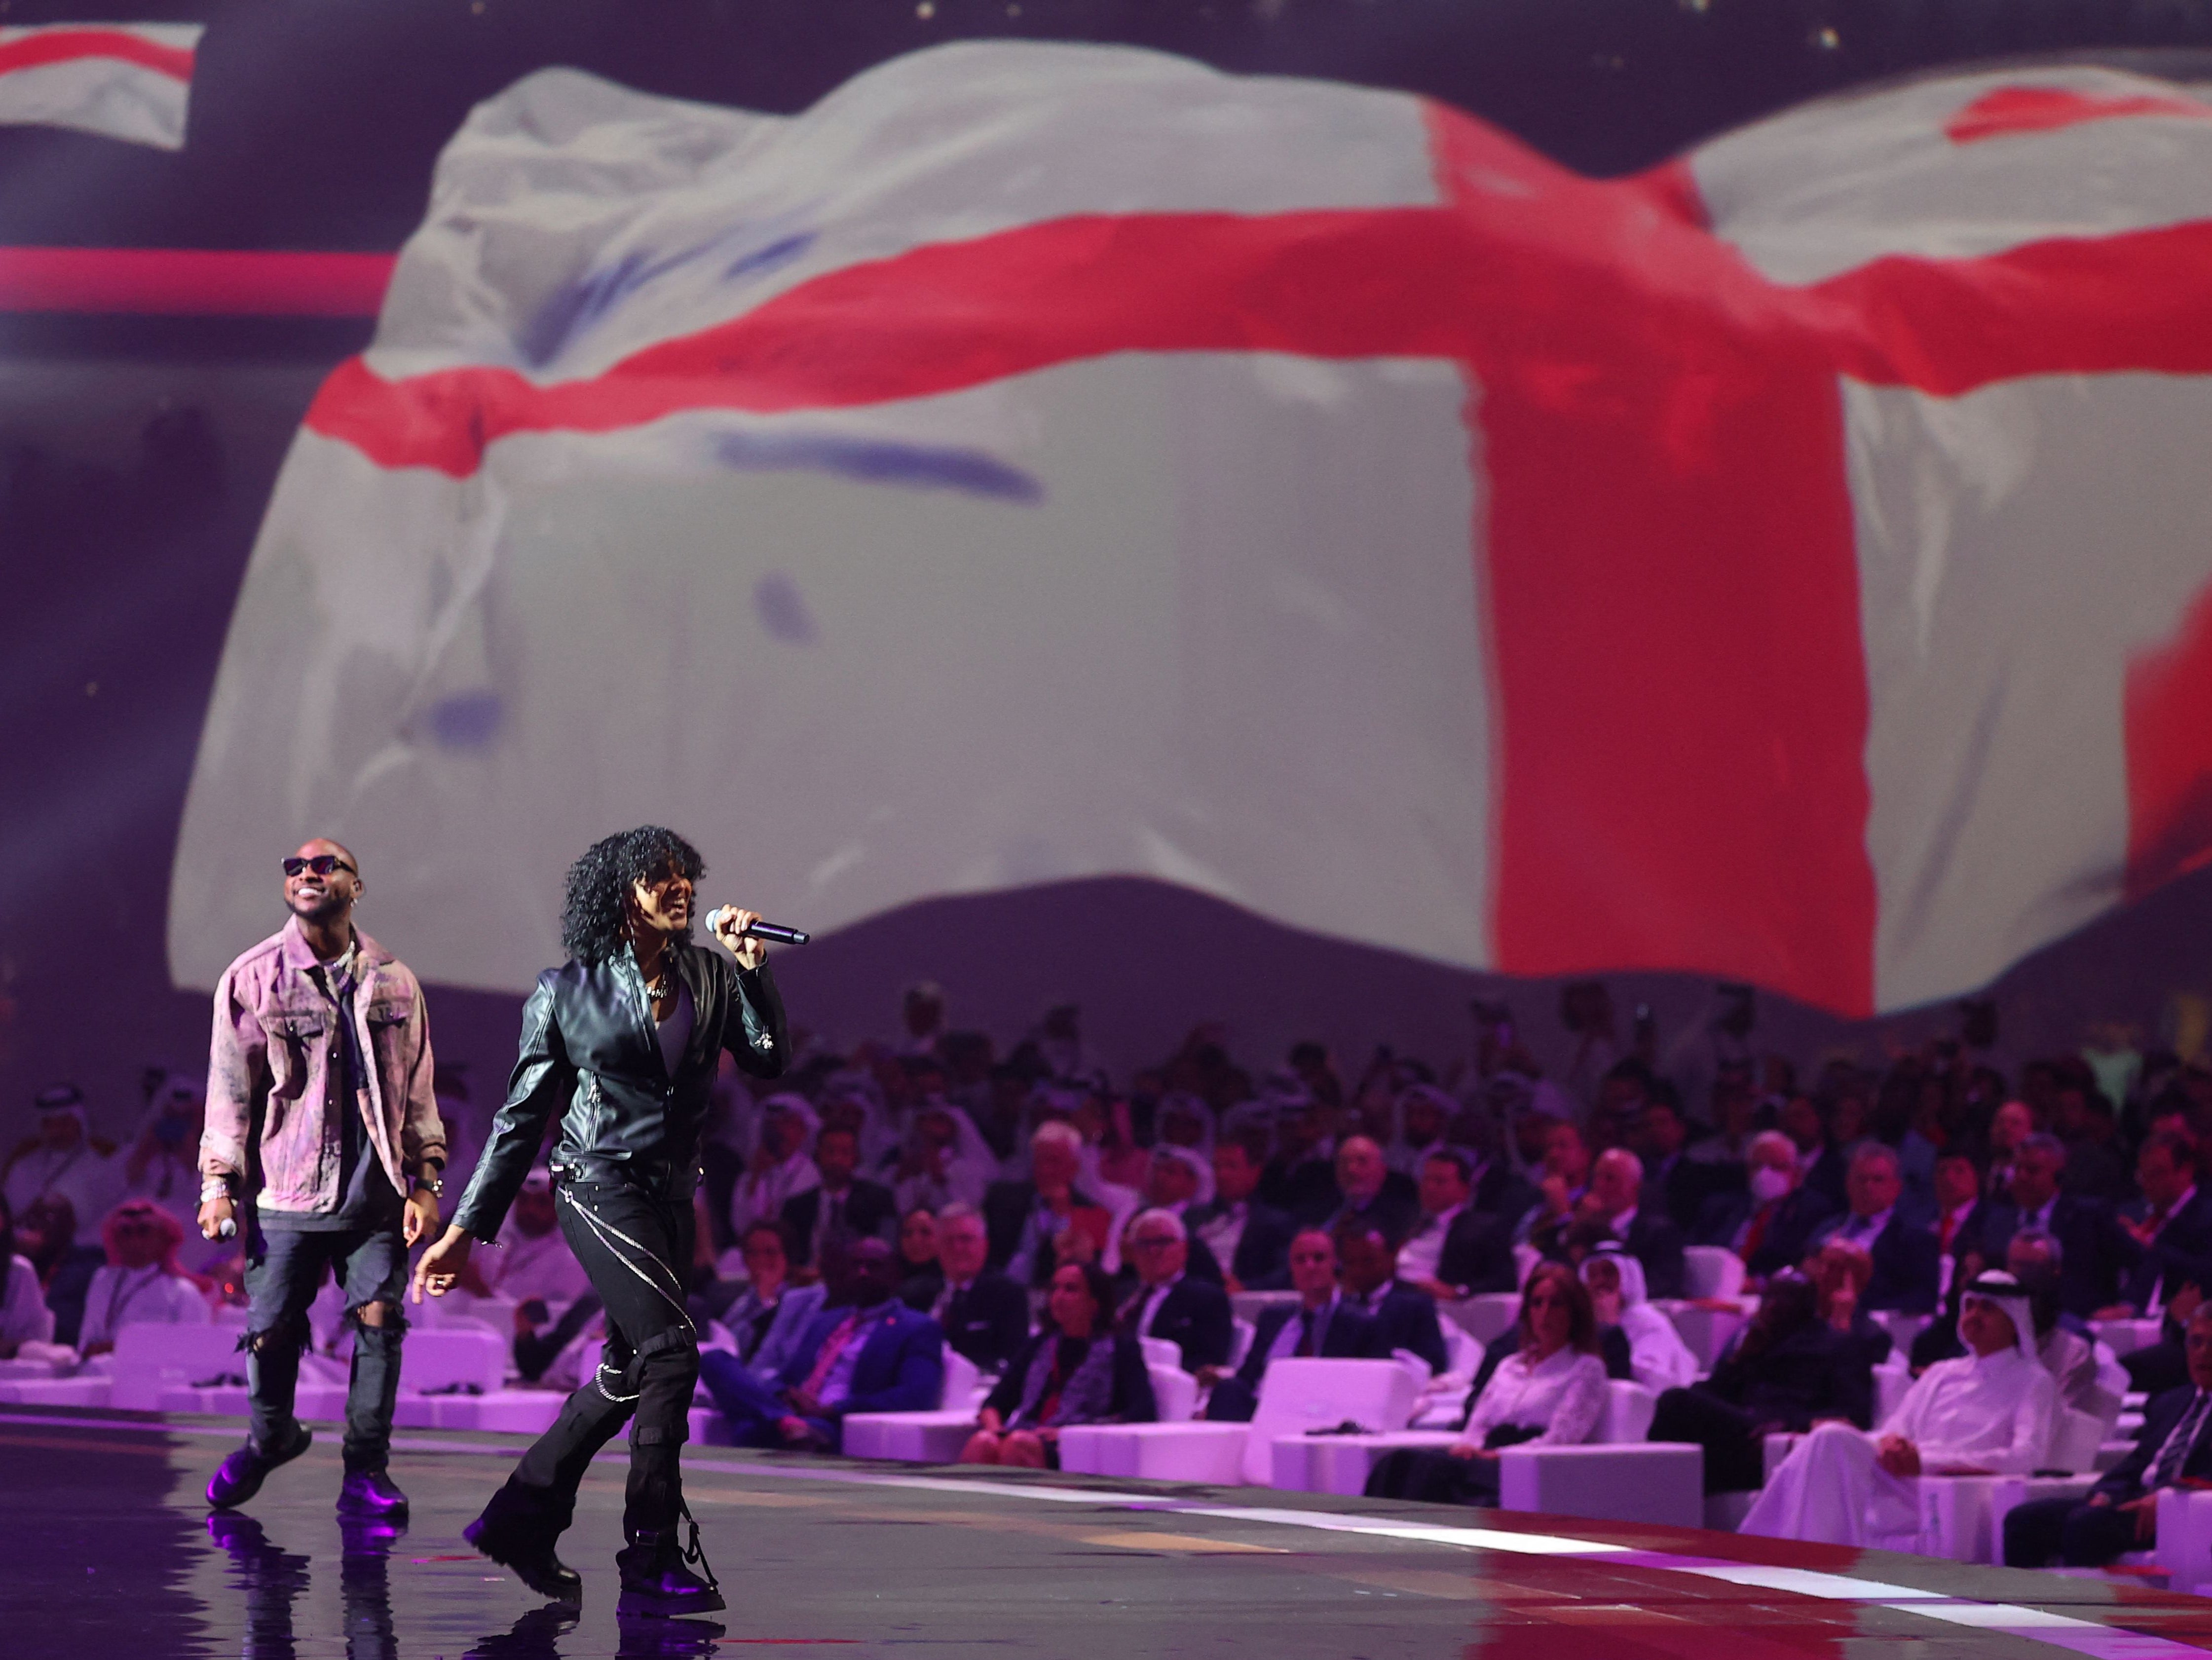 Davido and Trinidad Cardona perform in Qatar during the draw for the 2022 World Cup